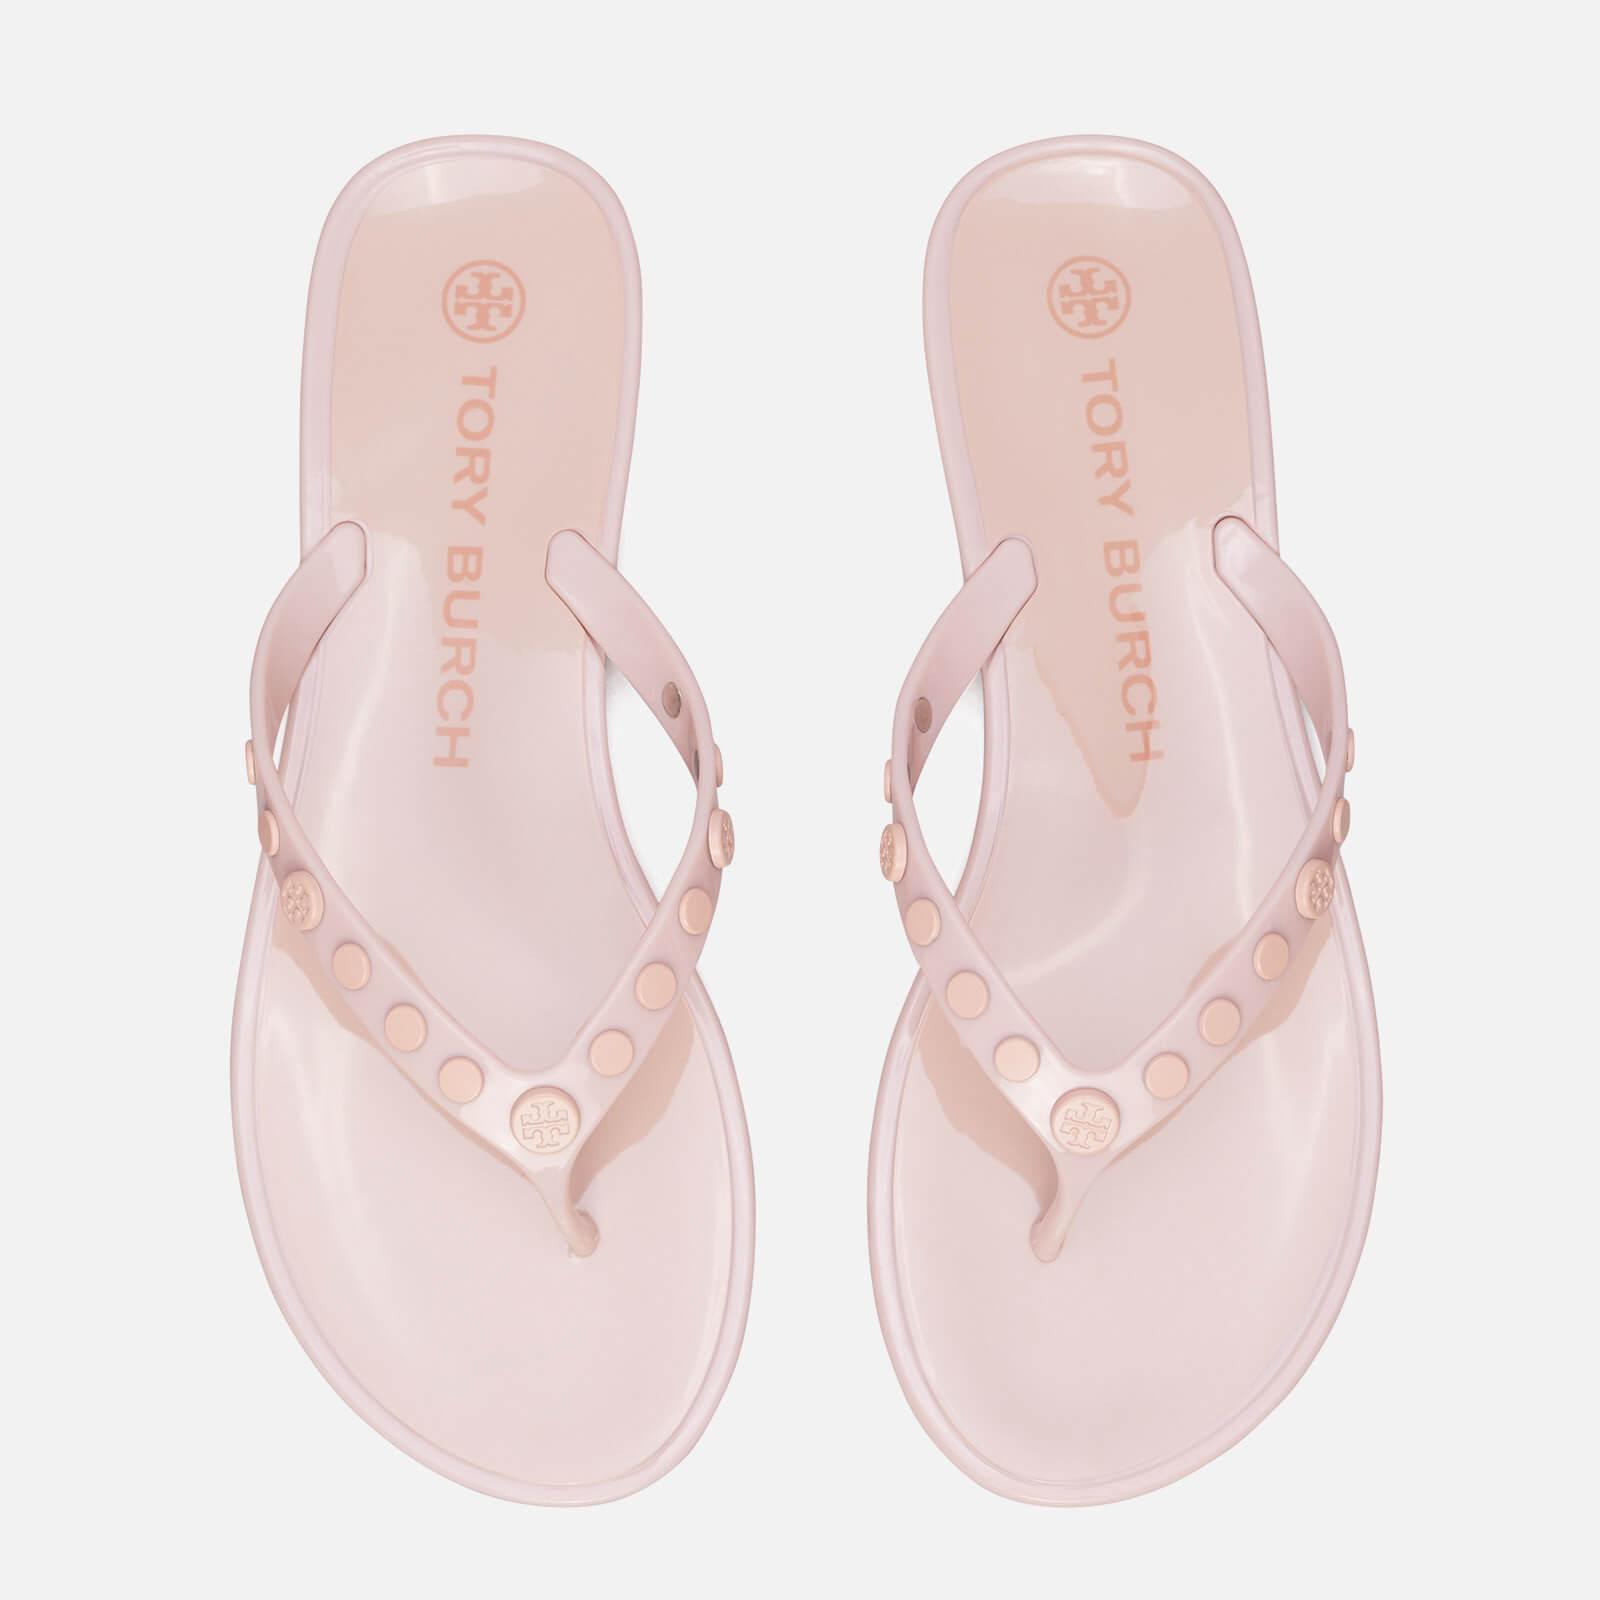 Tory Burch Studded Jelly Flip Flops in Pink | Lyst